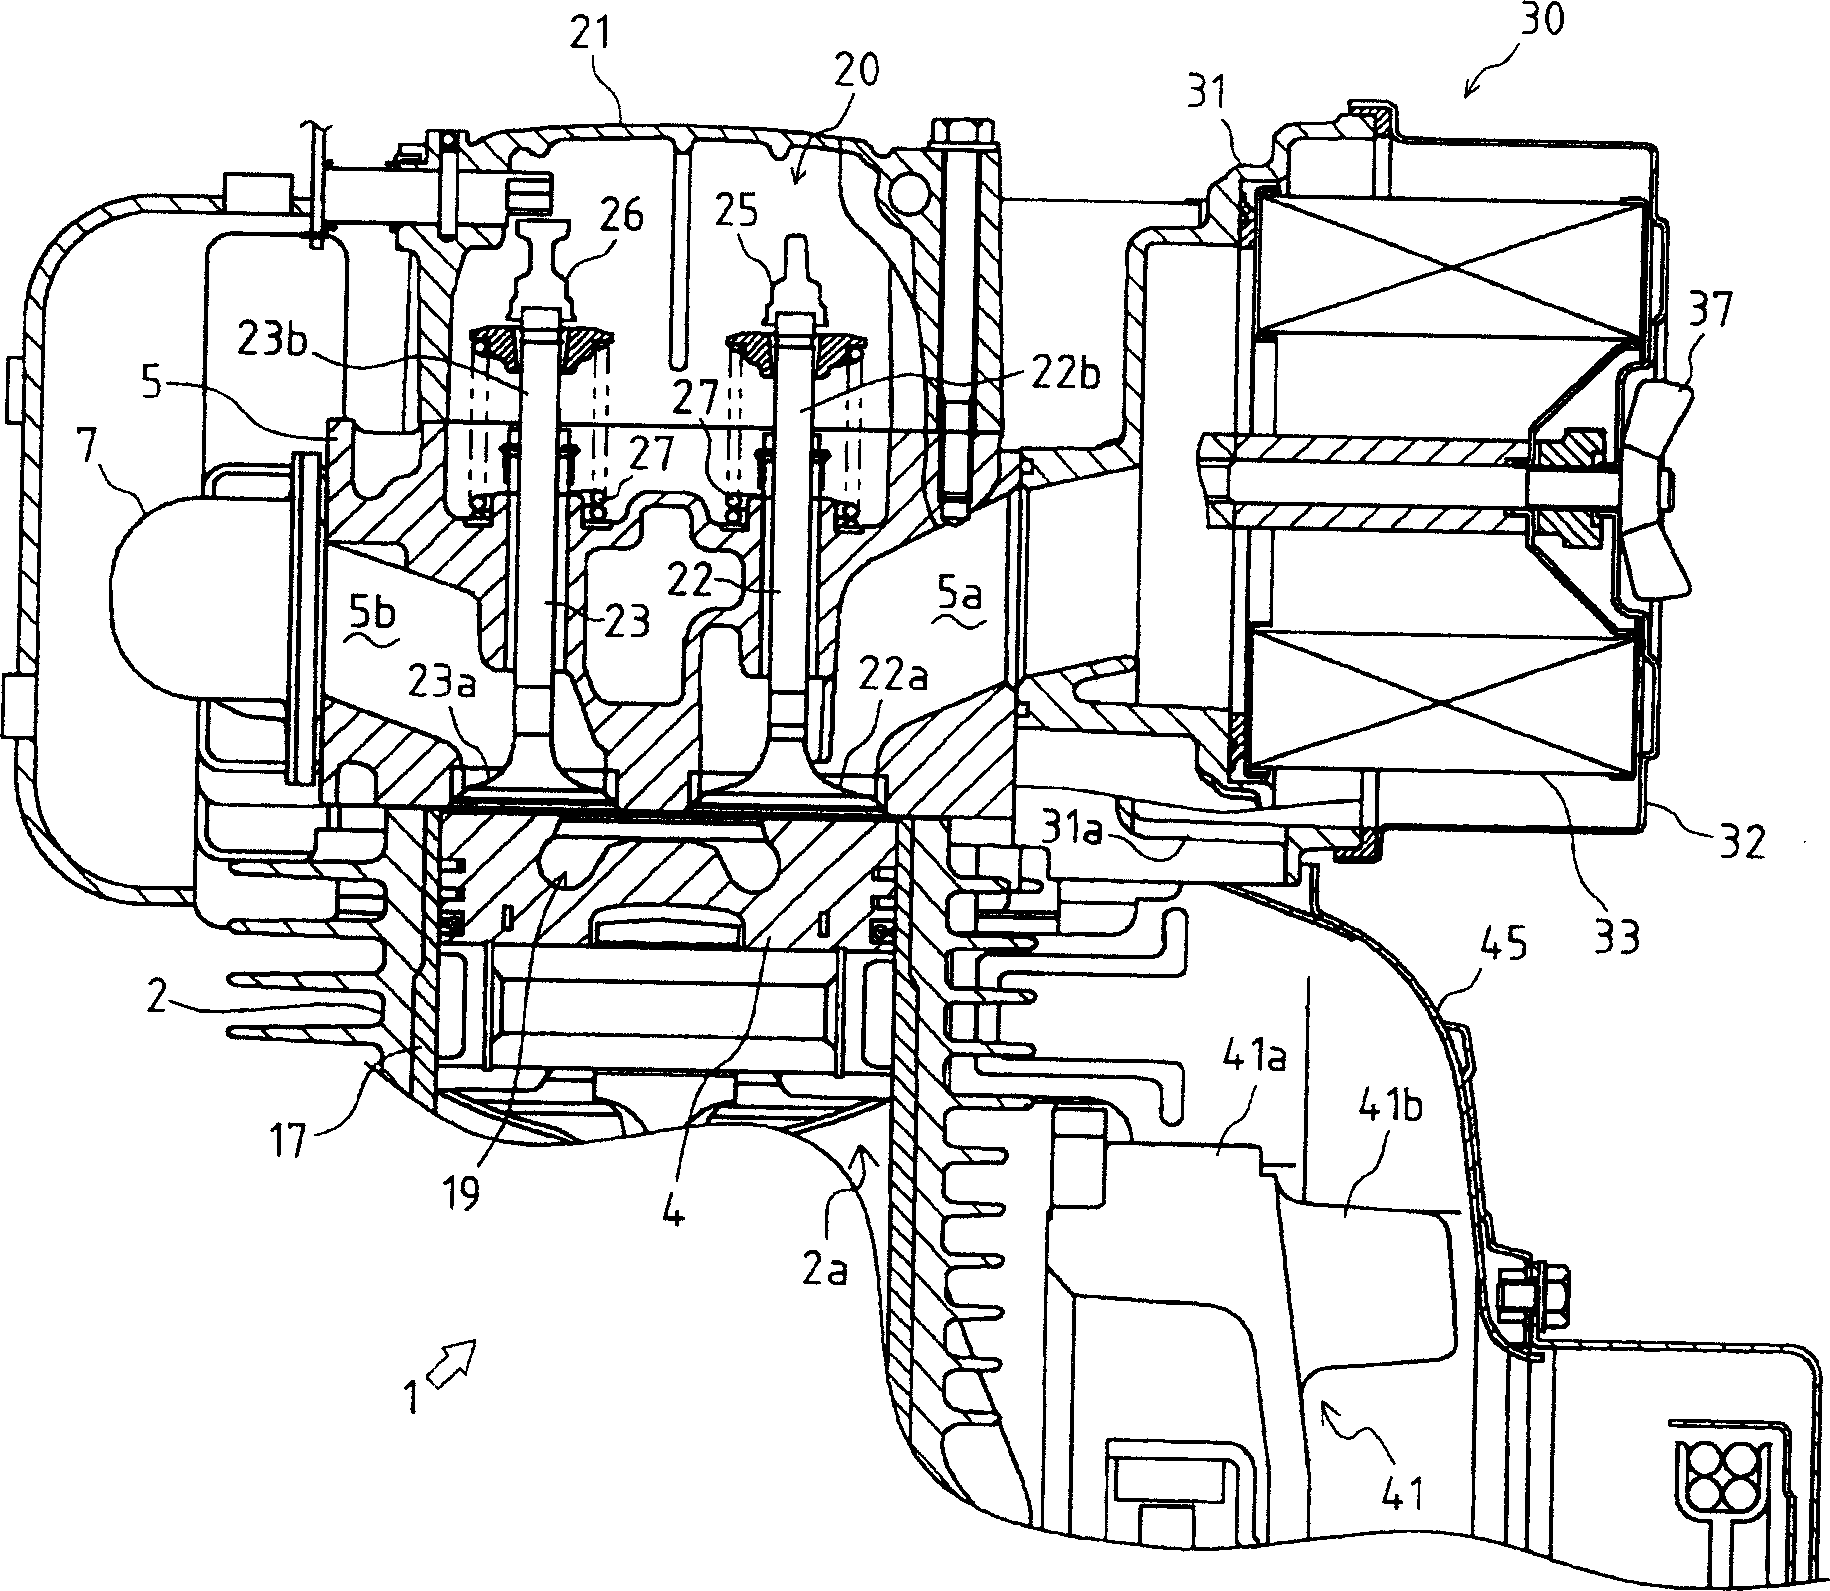 Superstructure of engine